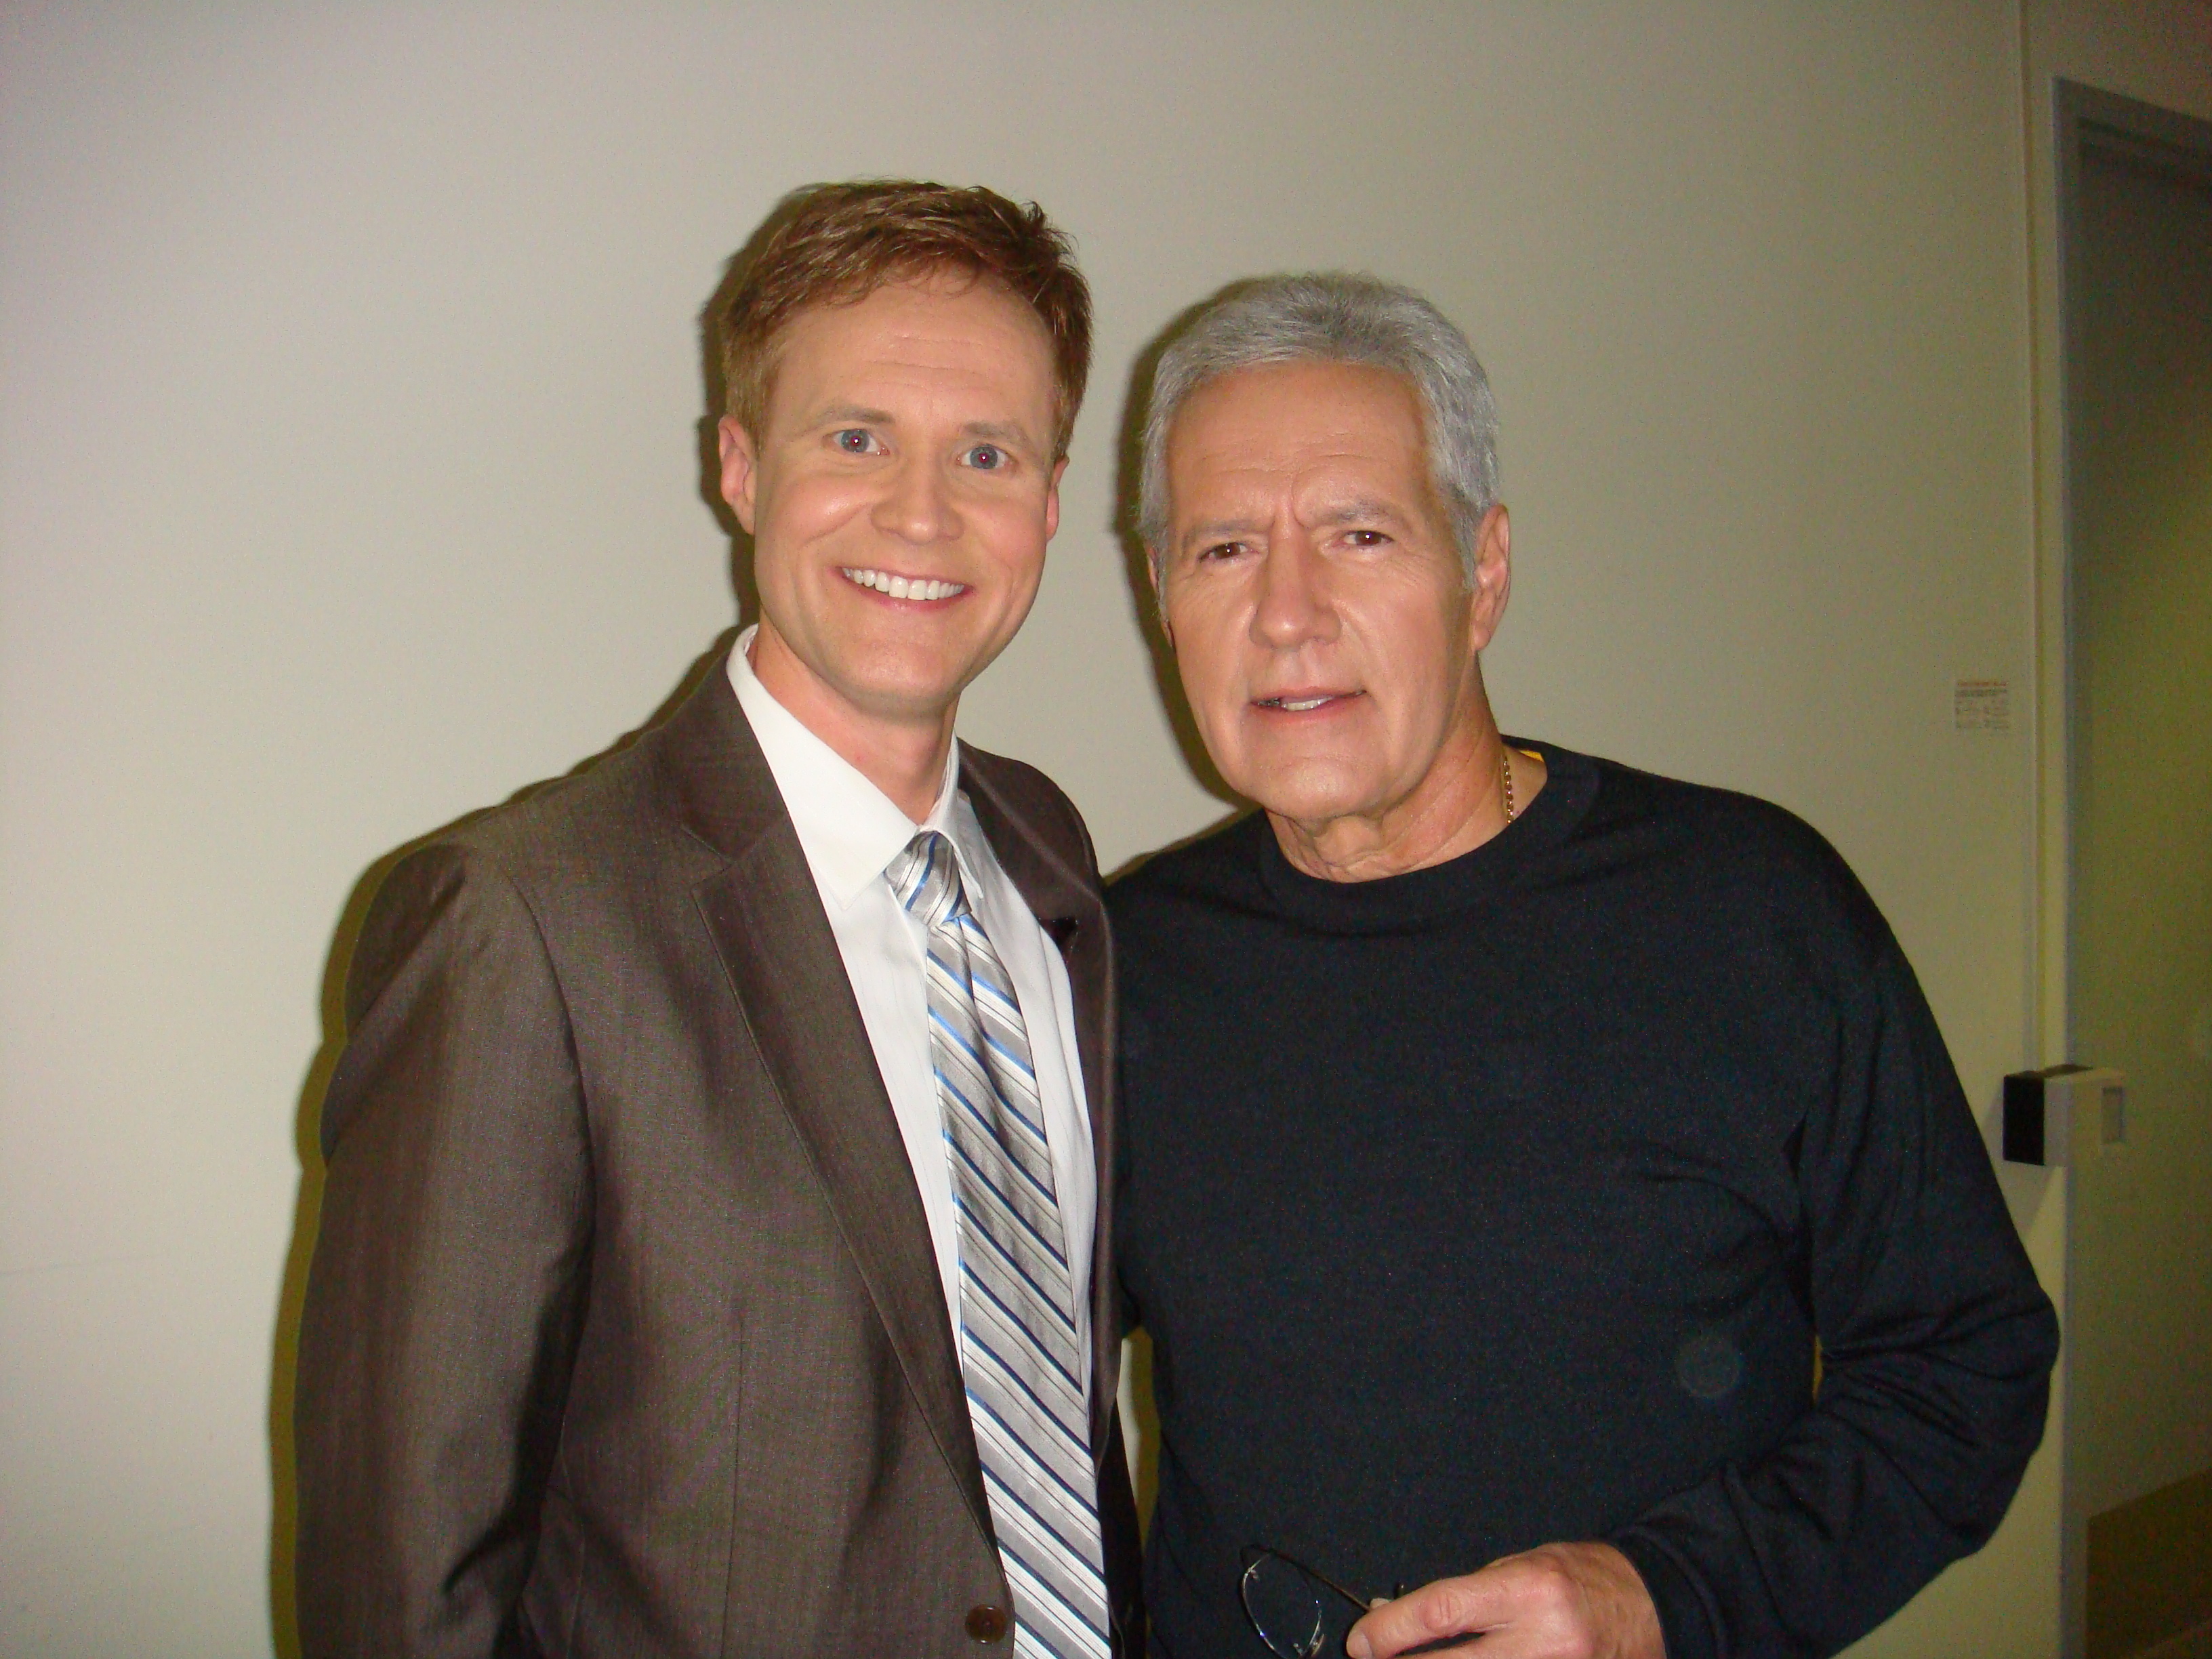 Todd and Mr. Trebek